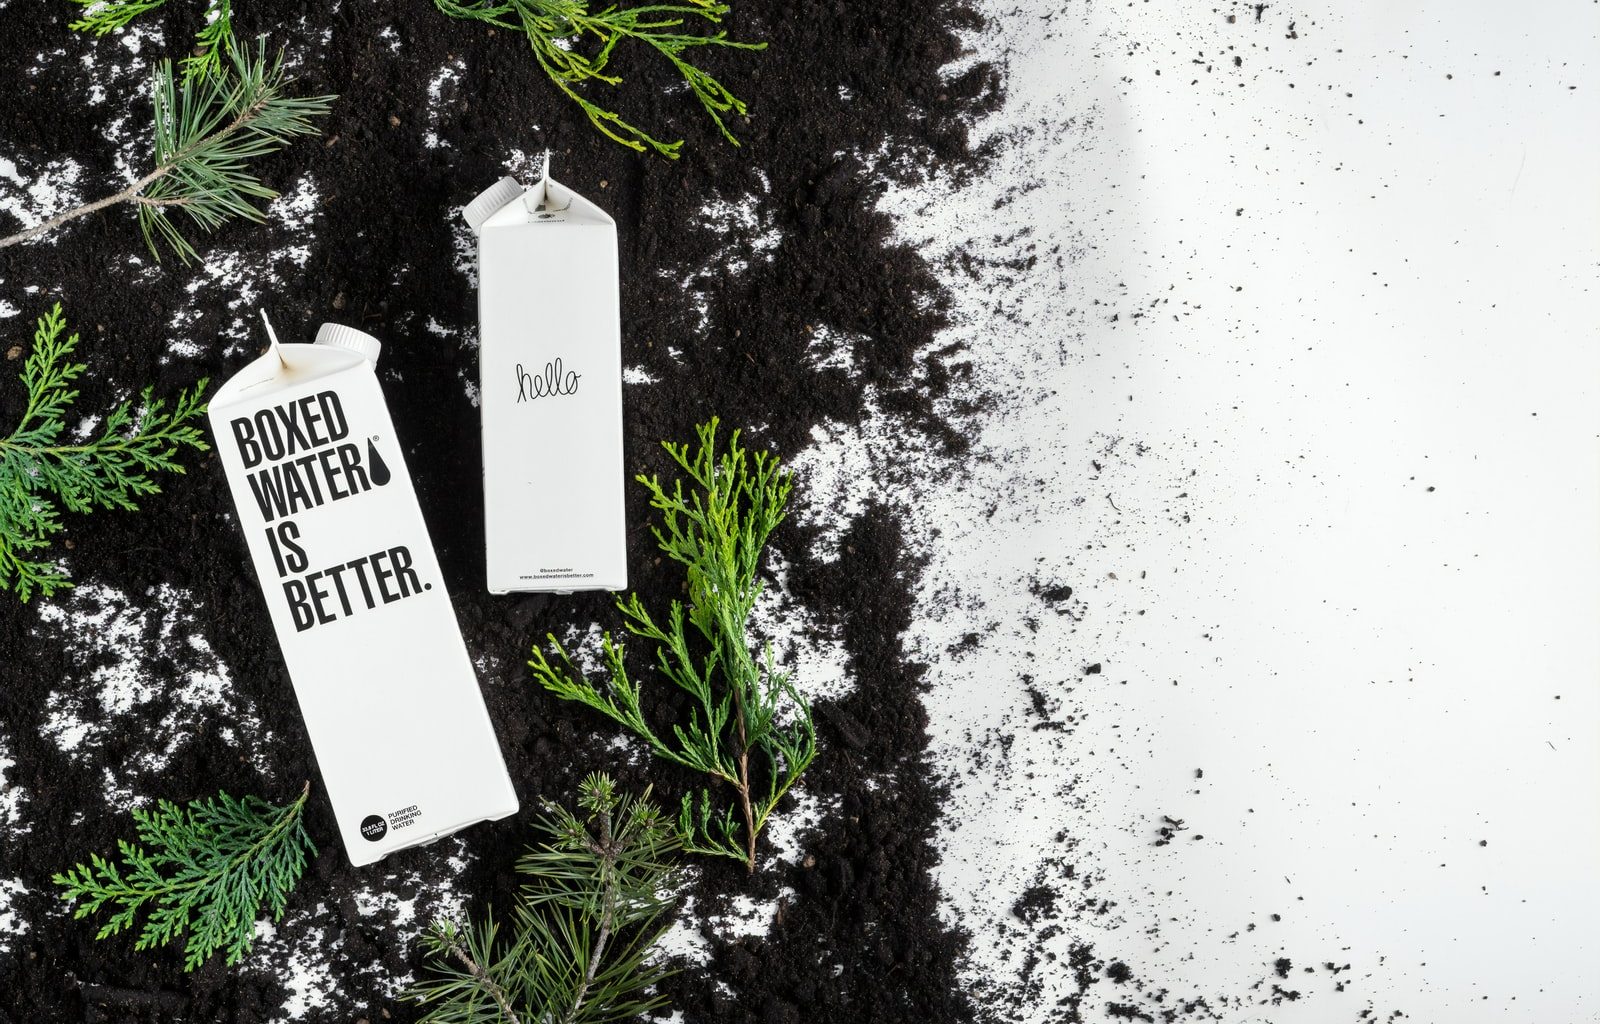 Boxed Water cartons on the black and white ground